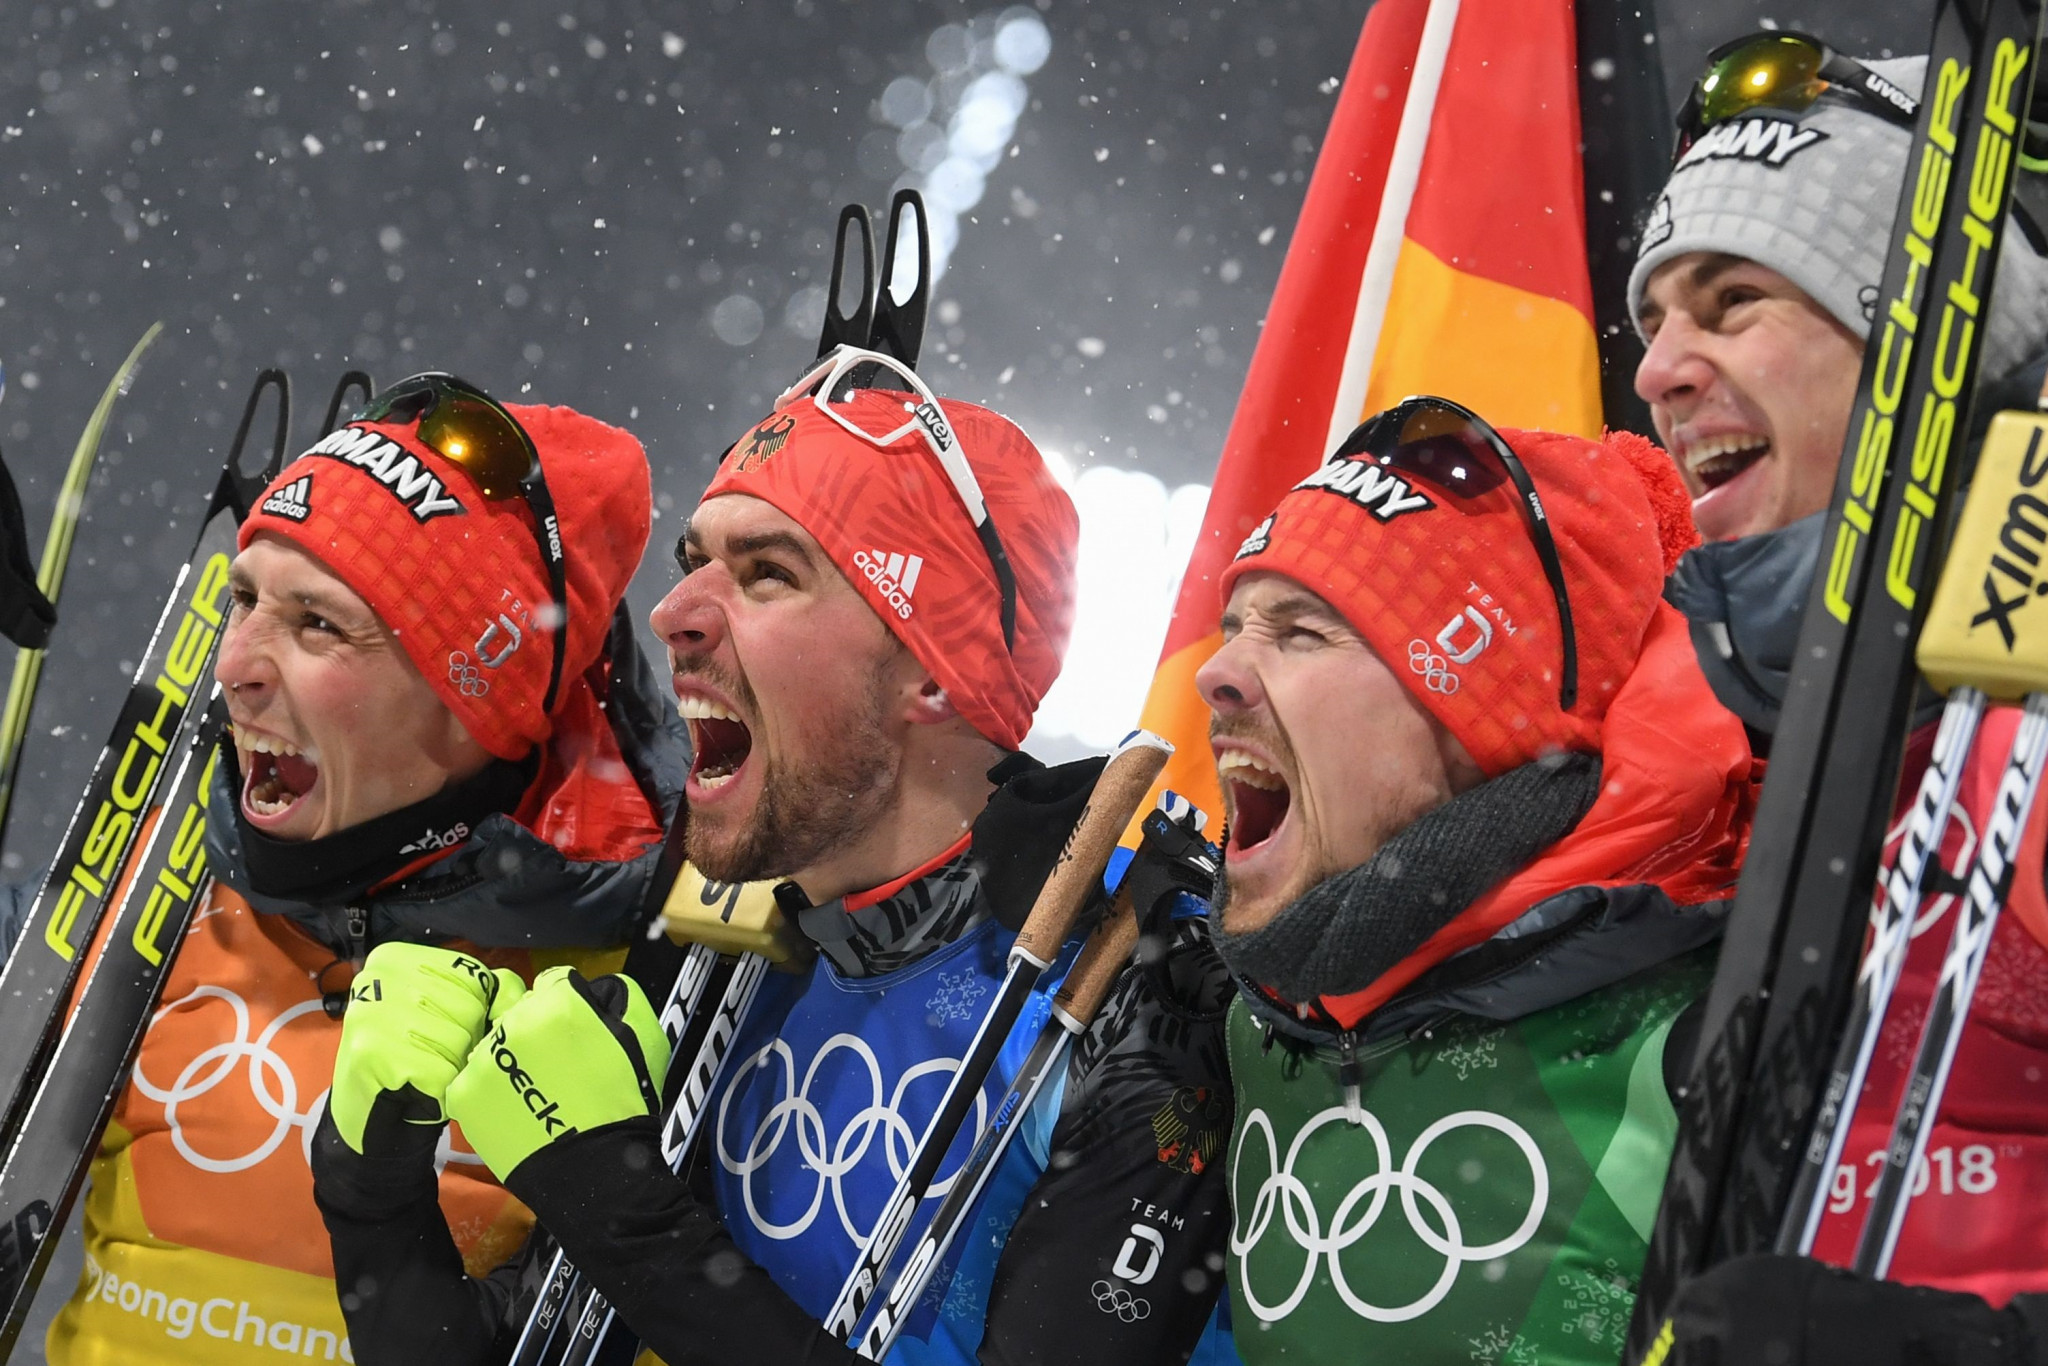 Germany won their first Nordic combined team Olympic title since the Calgary 1988 Games ©Getty Images